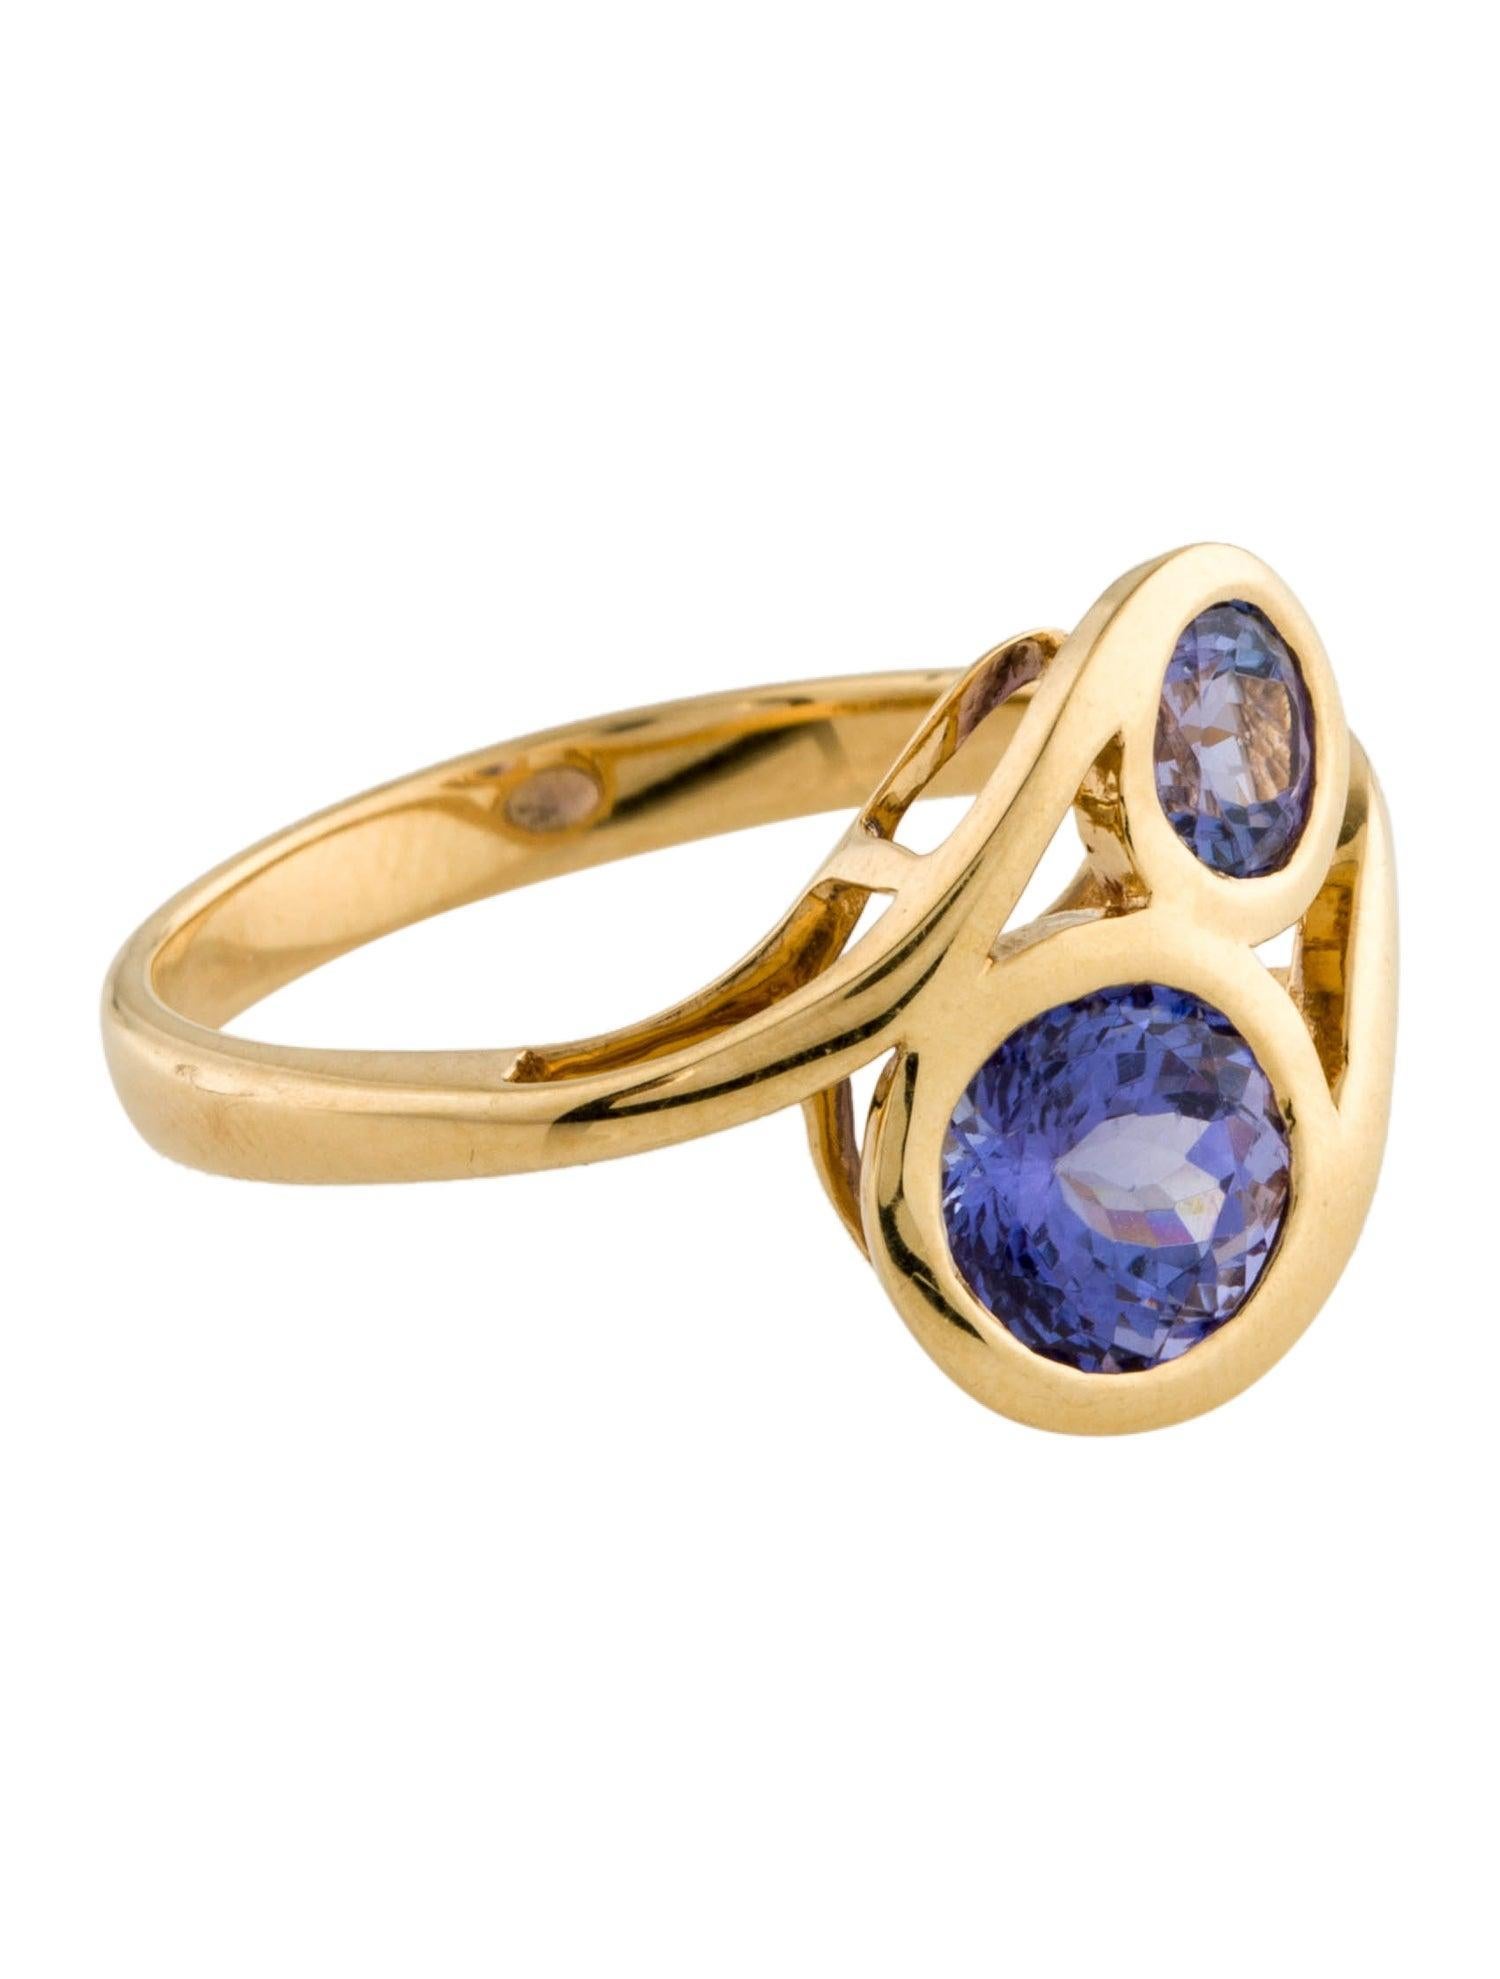 Introducing the epitome of celestial elegance - the Celestial Splendor Tanzanite Ring from our exclusive collection, The Beauty of the Night Sky. Crafted with meticulous precision and a passion for perfection, this ring is a radiant embodiment of